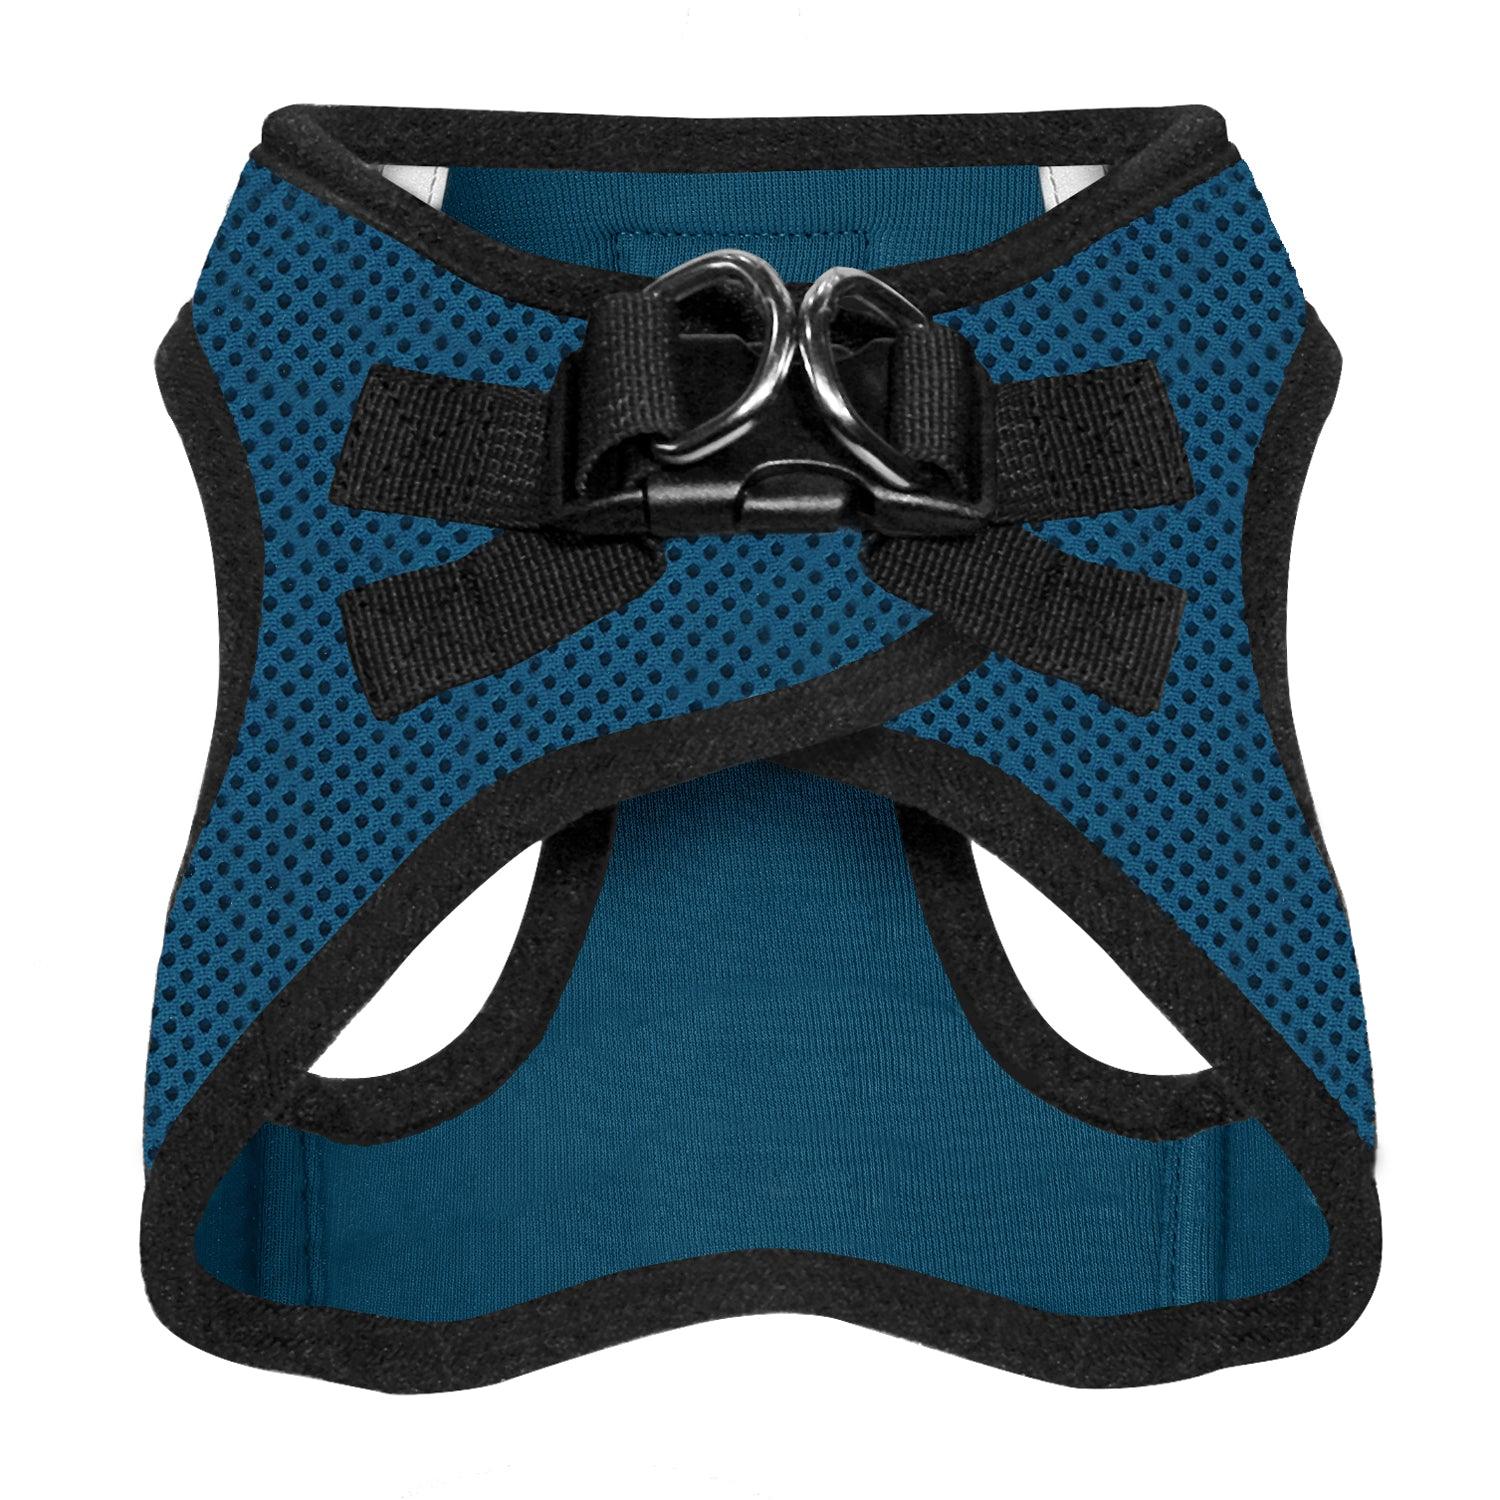 Step-In Air Pet Harness - VOYAGER Dog Harnesses